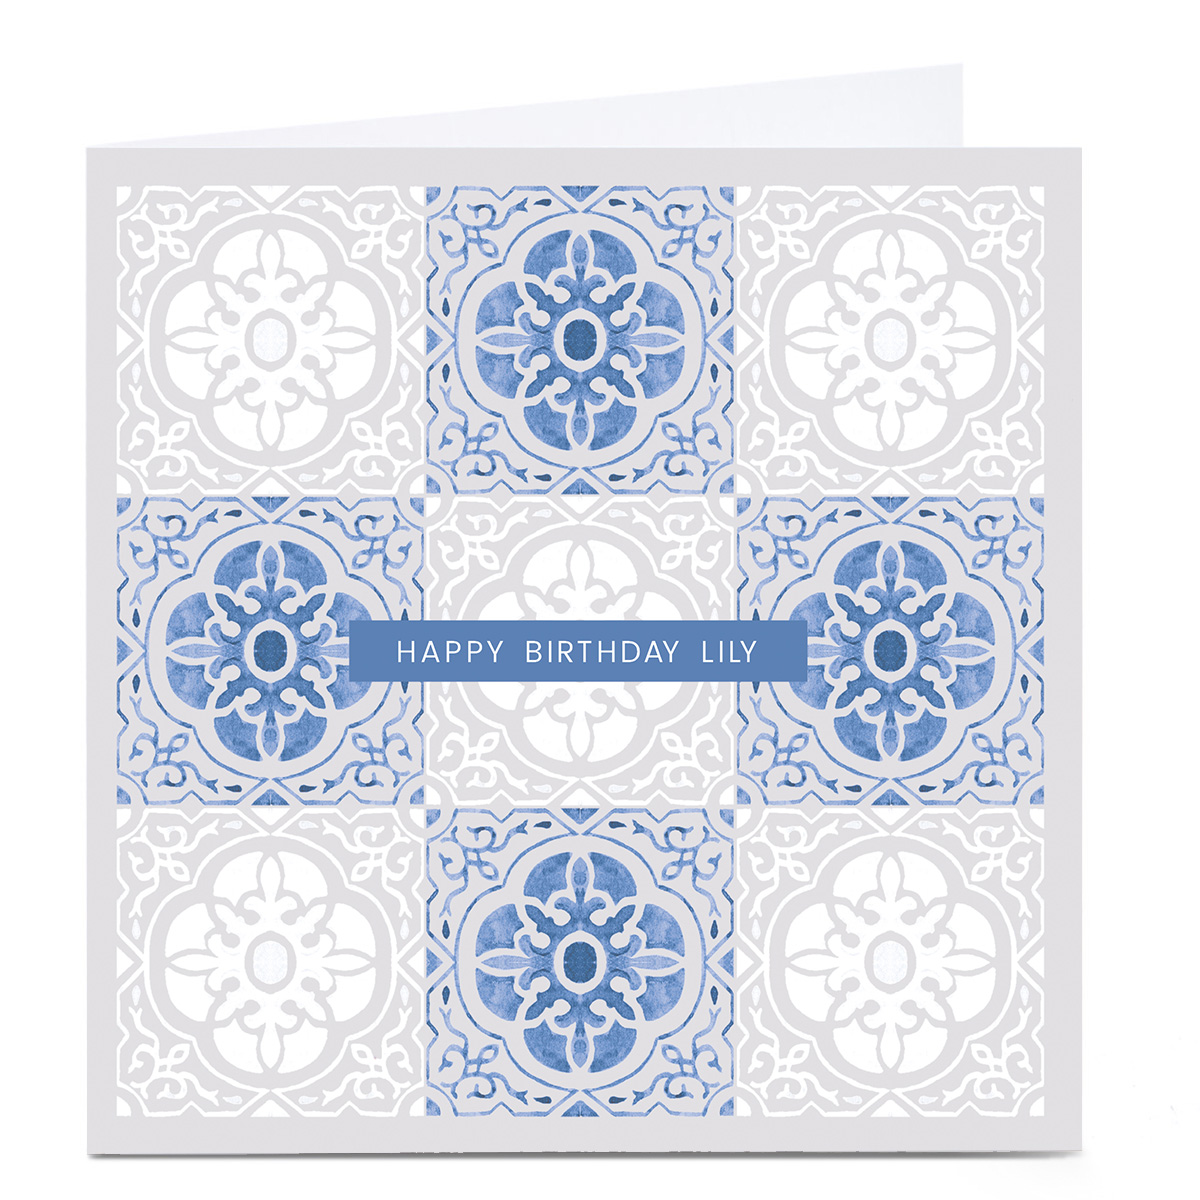 Personalised Birthday Card - Blue and White Mosaic